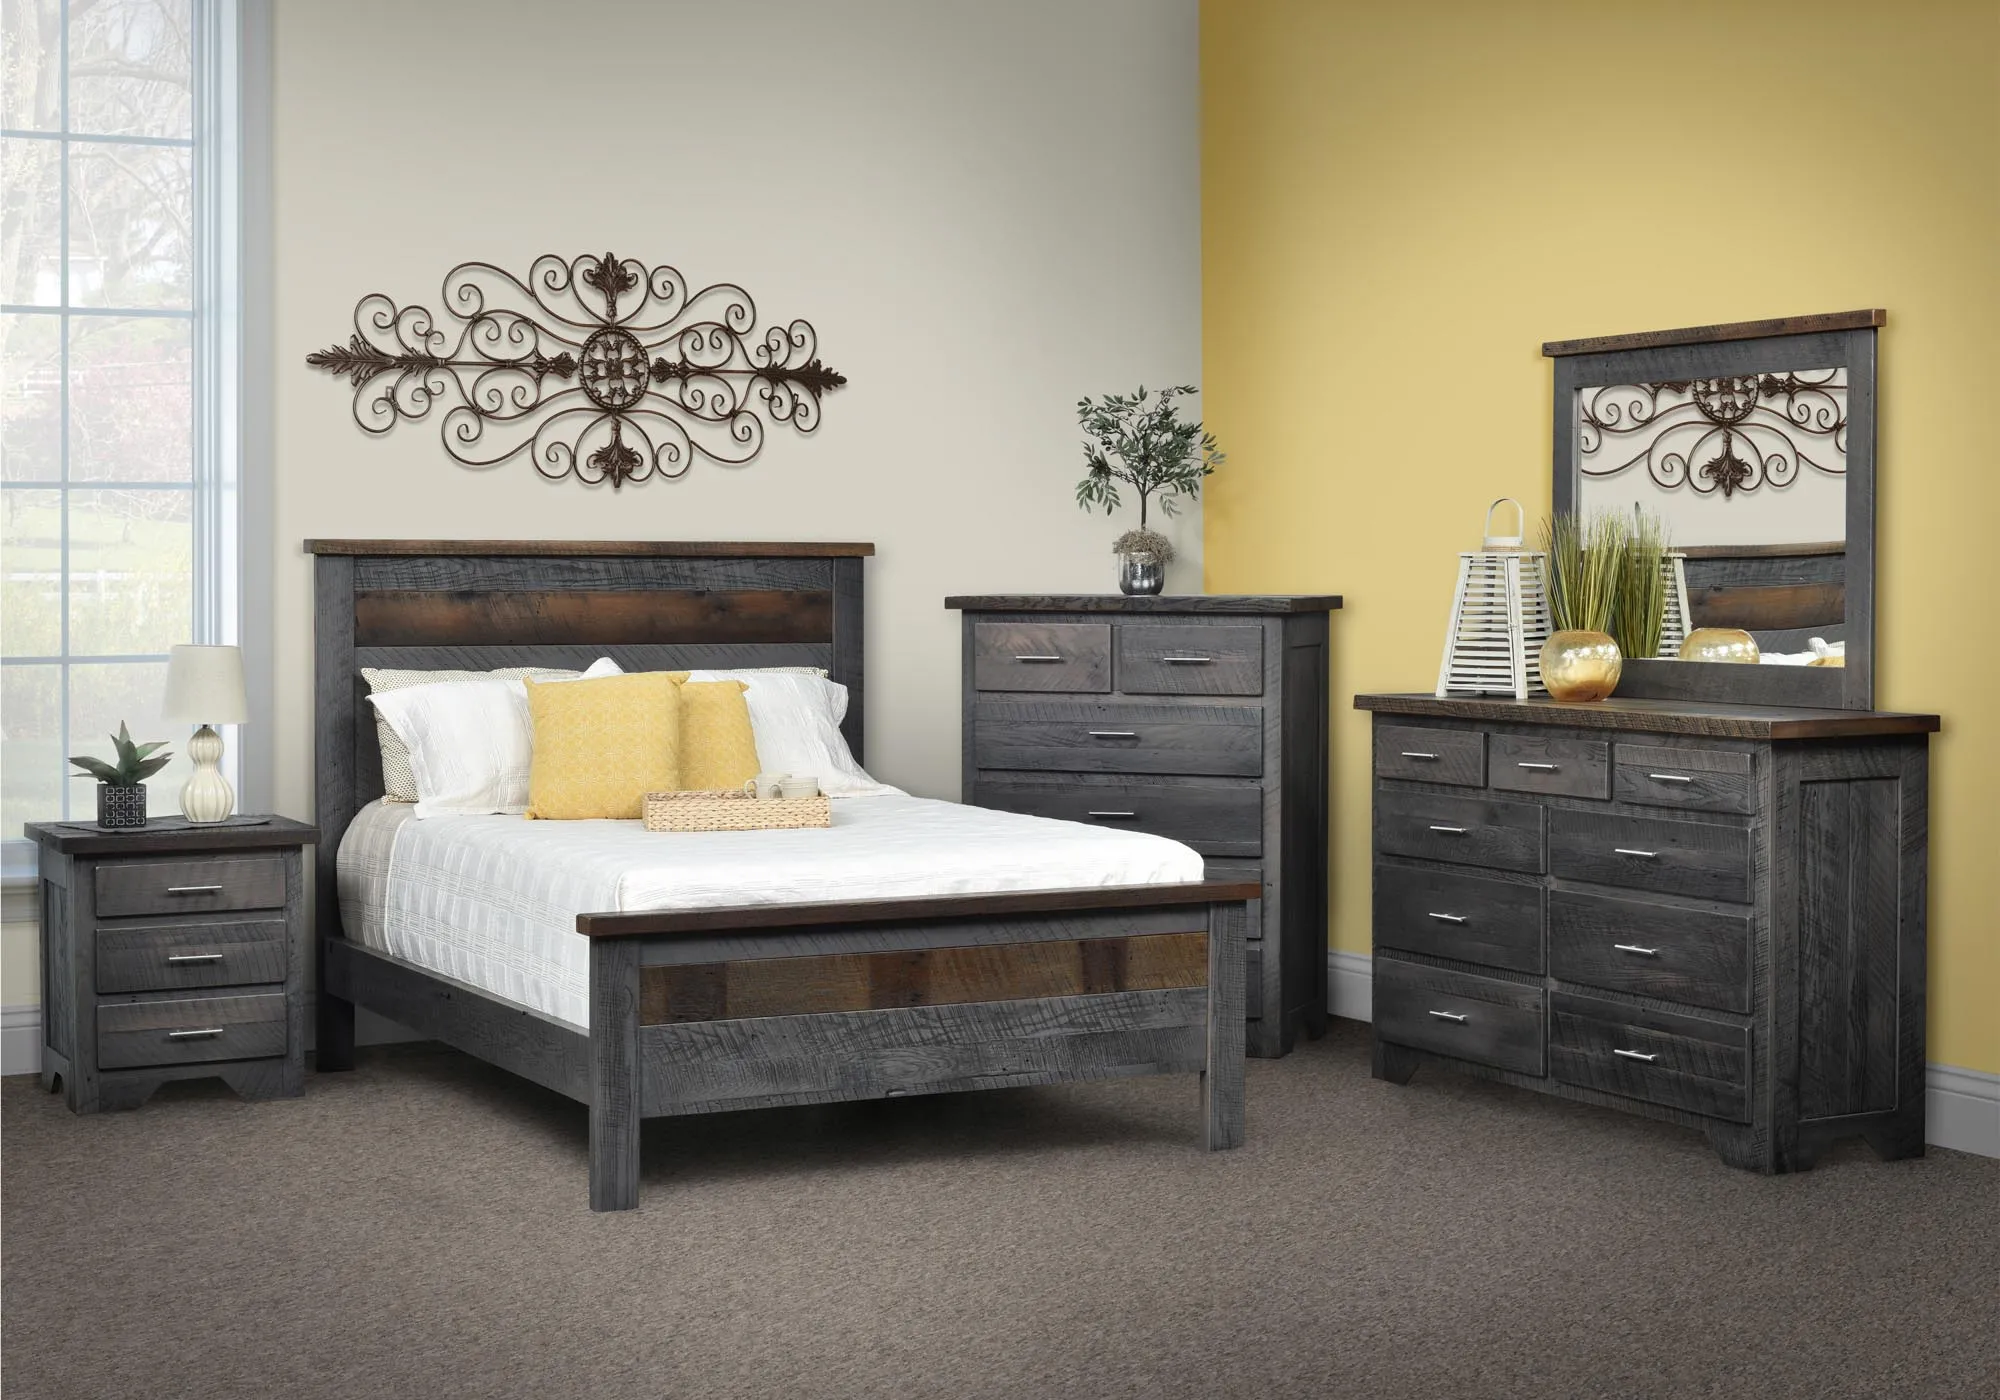 London Fog Bedroom Collection